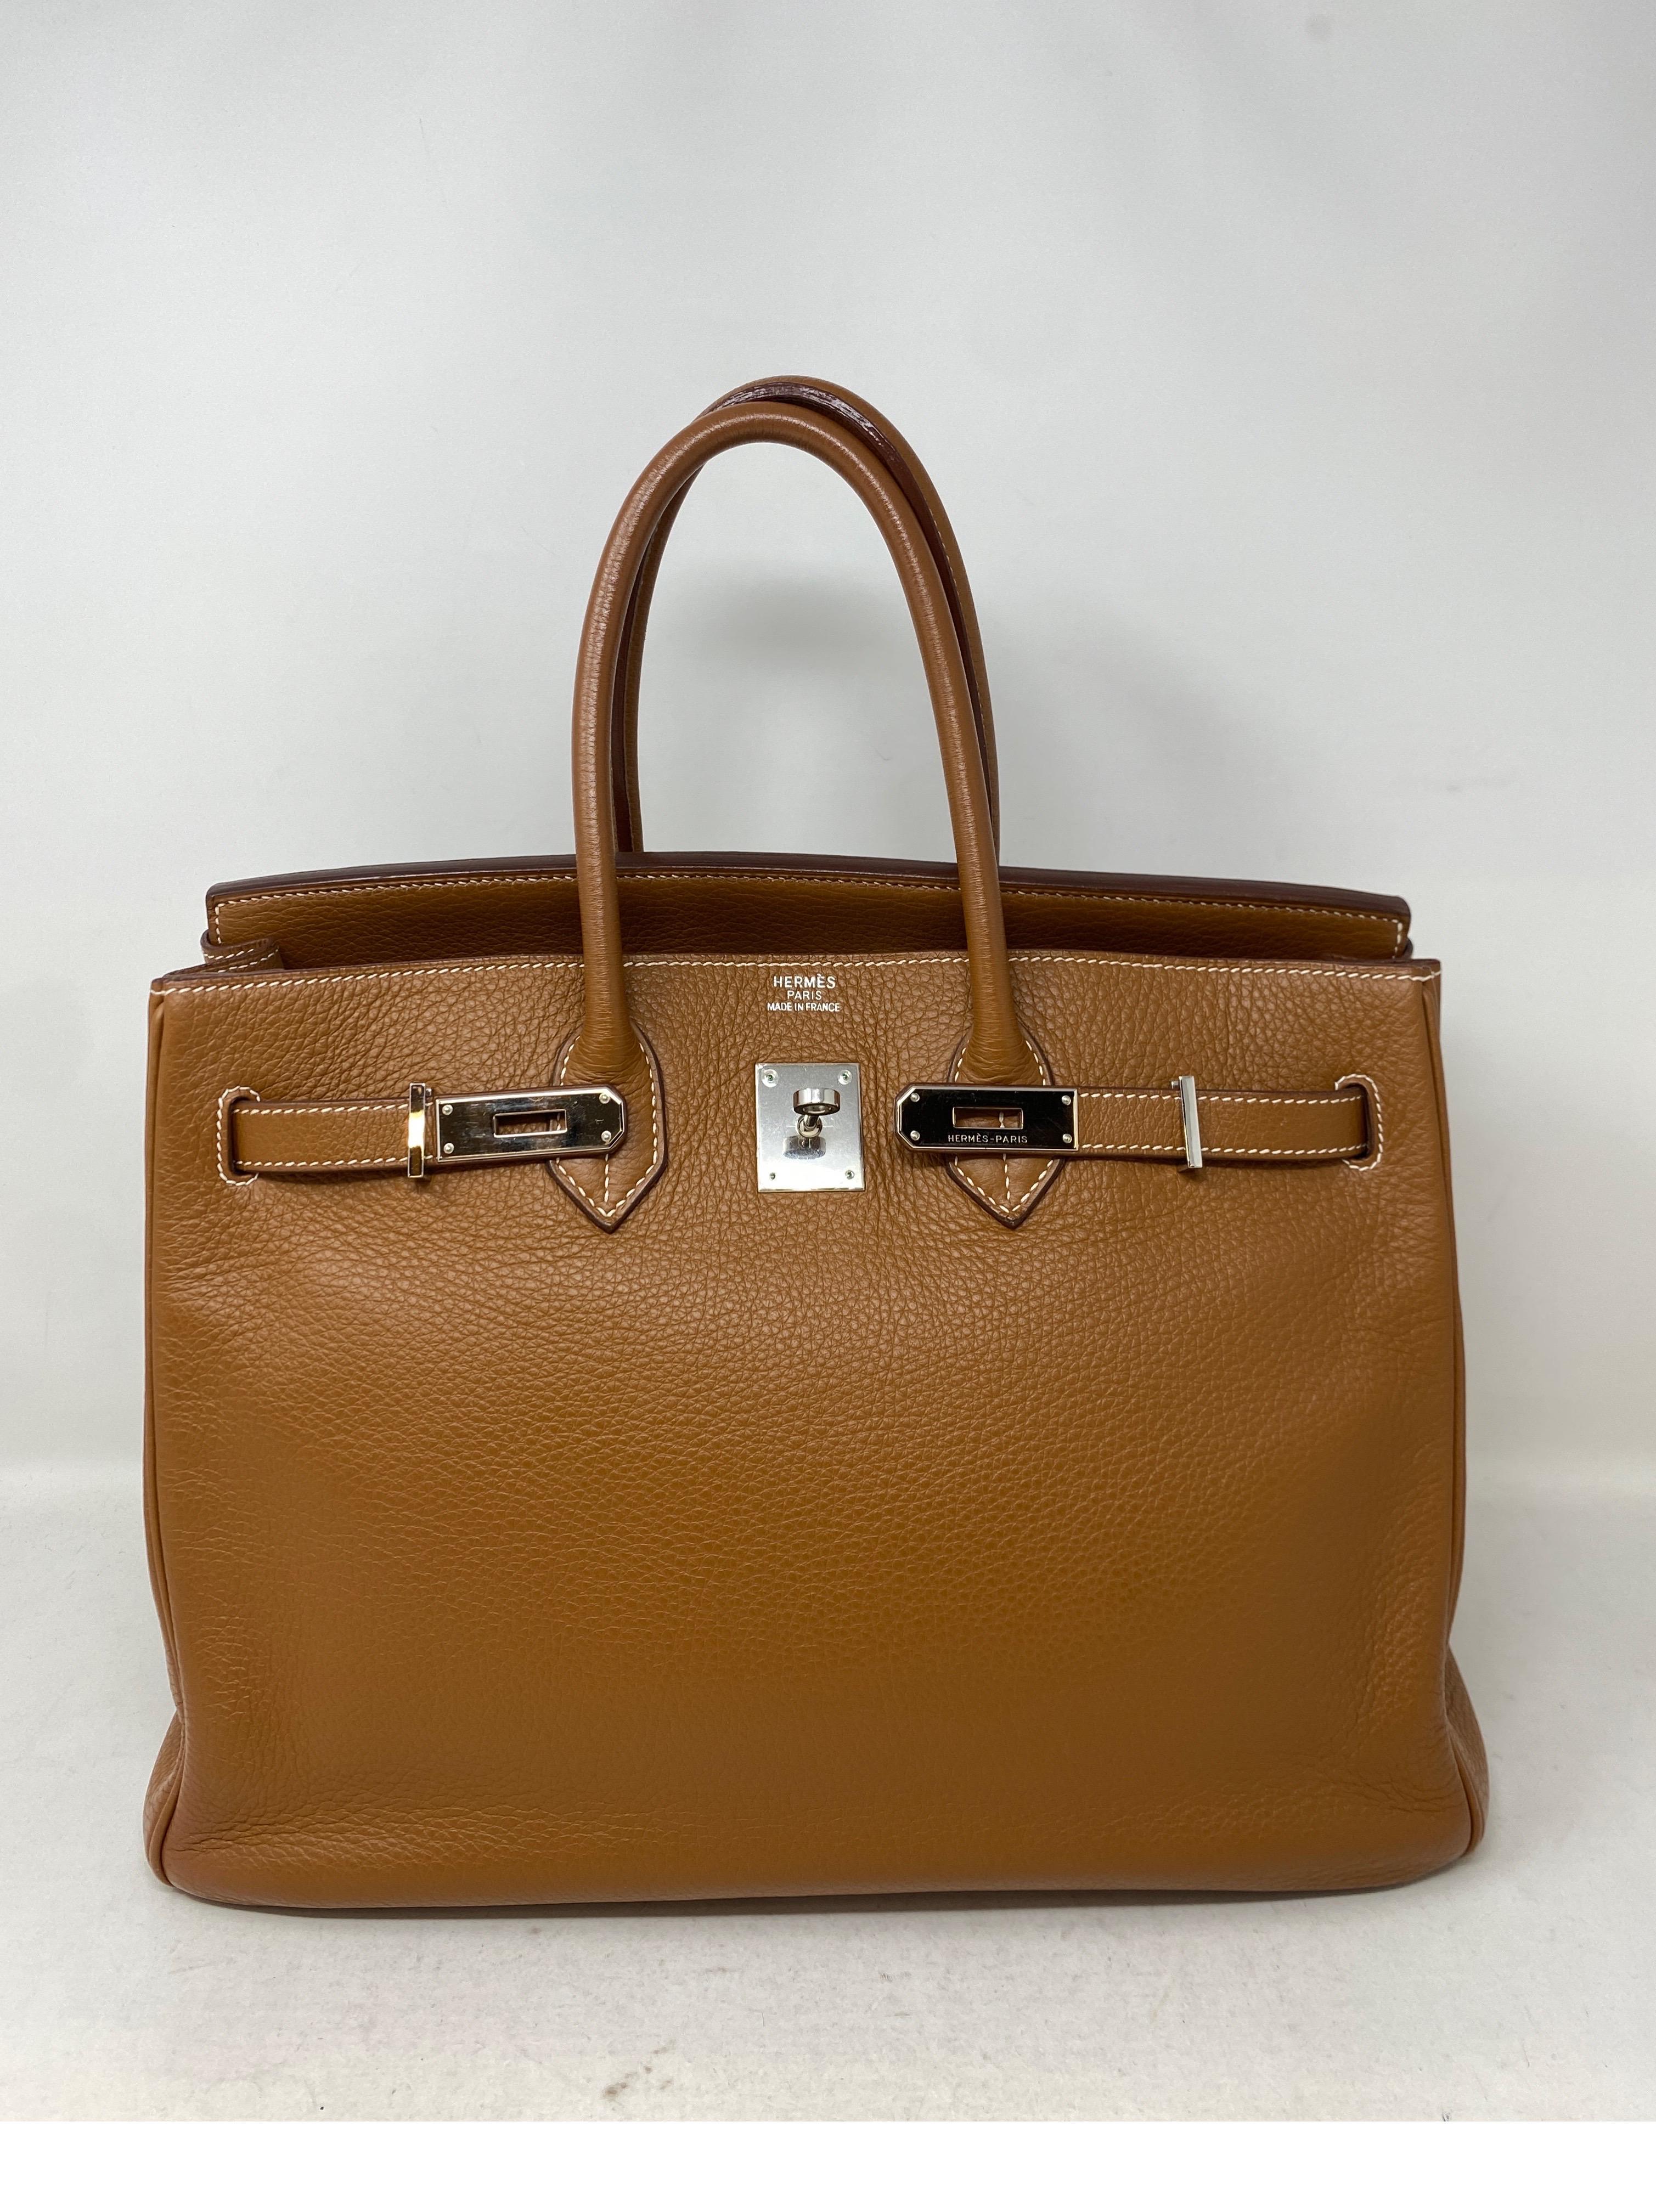 Hermes Gold Birkin 35 Bag. Clemence leather. Palladium hardware. Excellent condition. Most sought after color gold leather. Classic tan color. Includes clochette, lock, keys, and dust bag. Guaranteed authentic. 